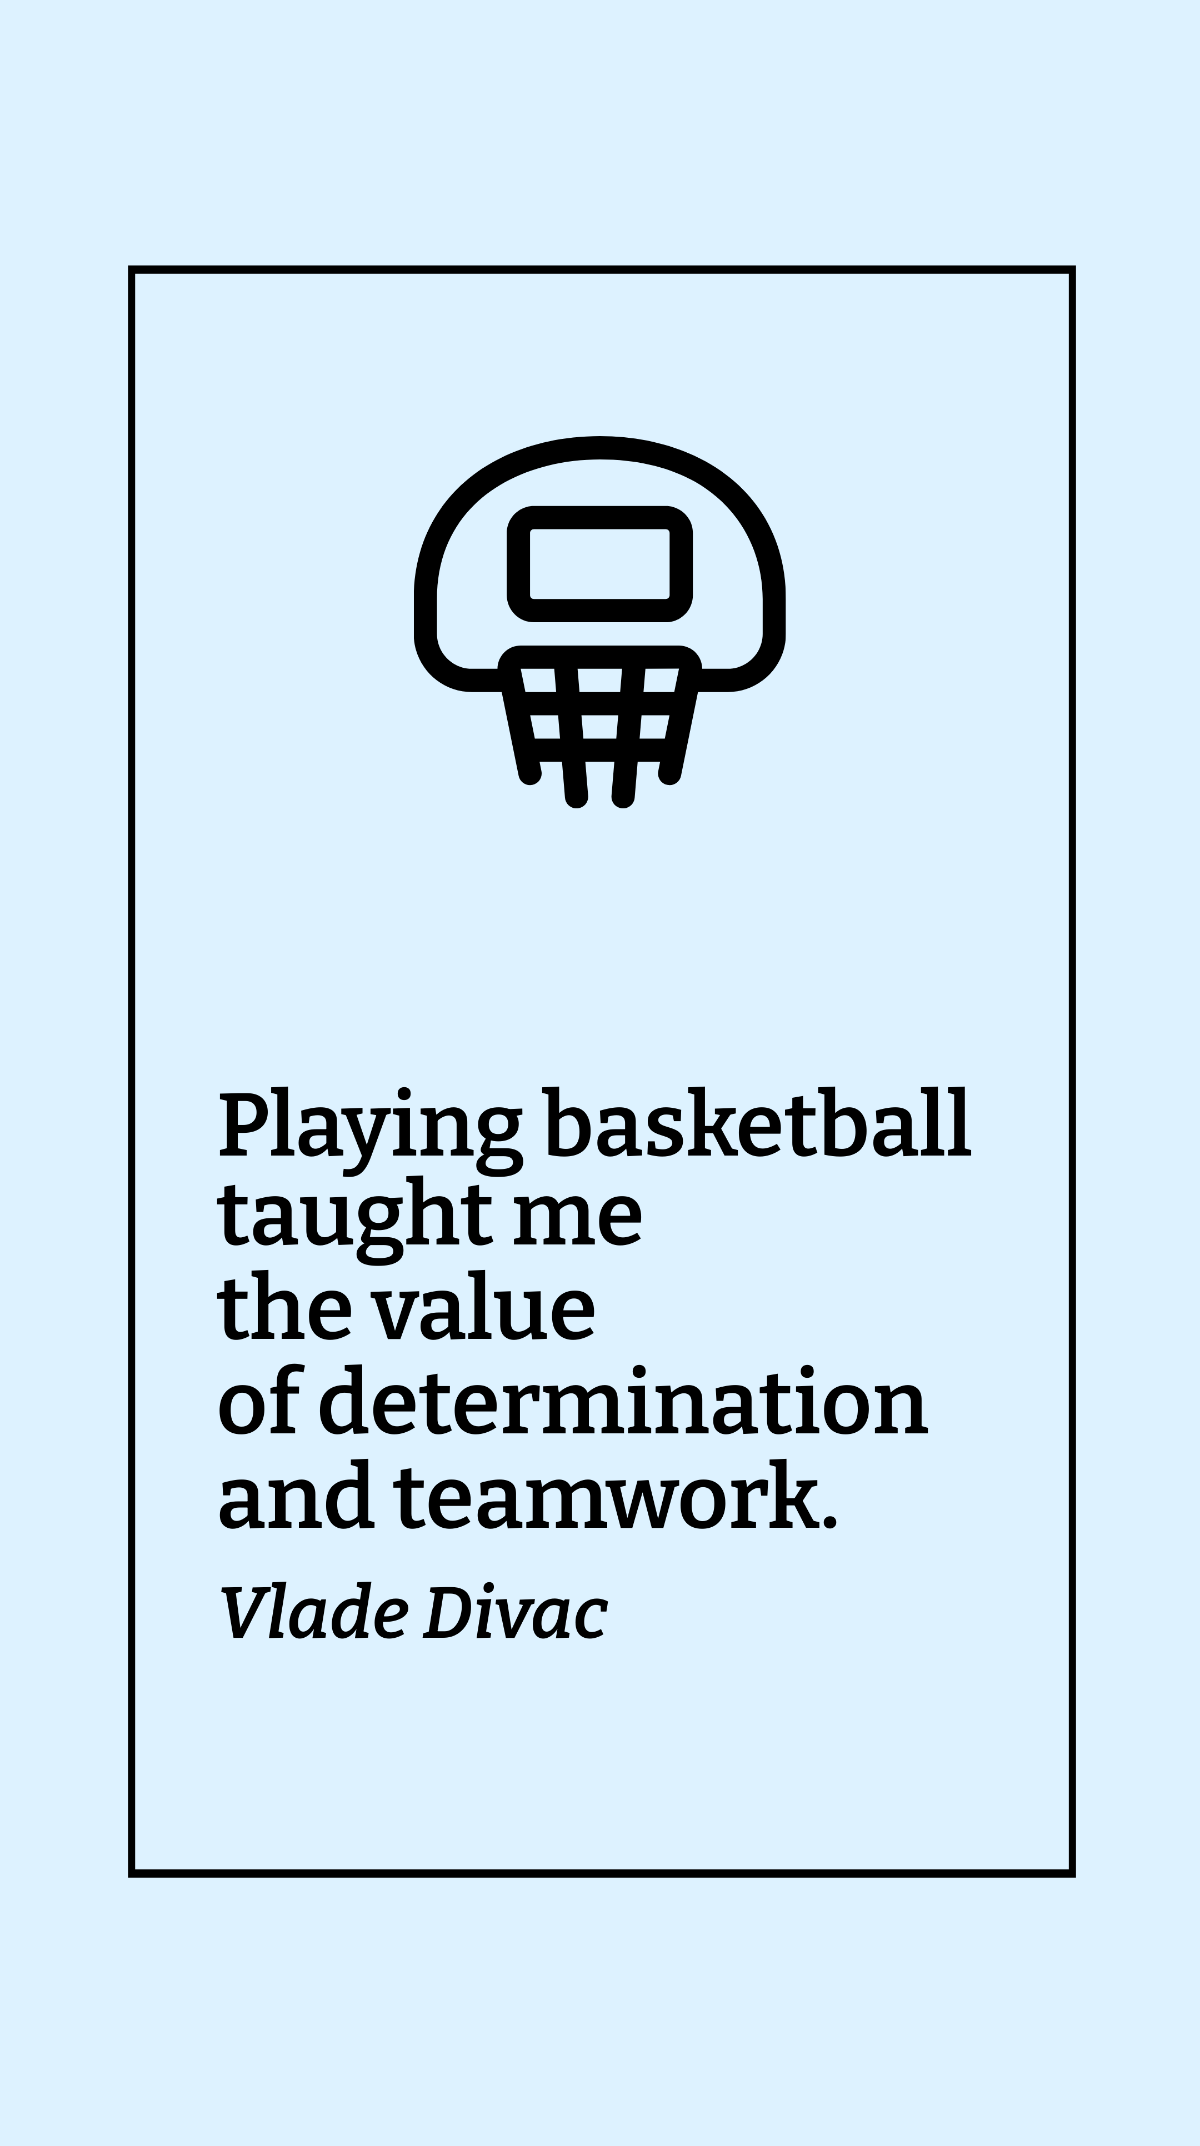 Vlade Divac - Playing basketball taught me the value of determination and teamwork.